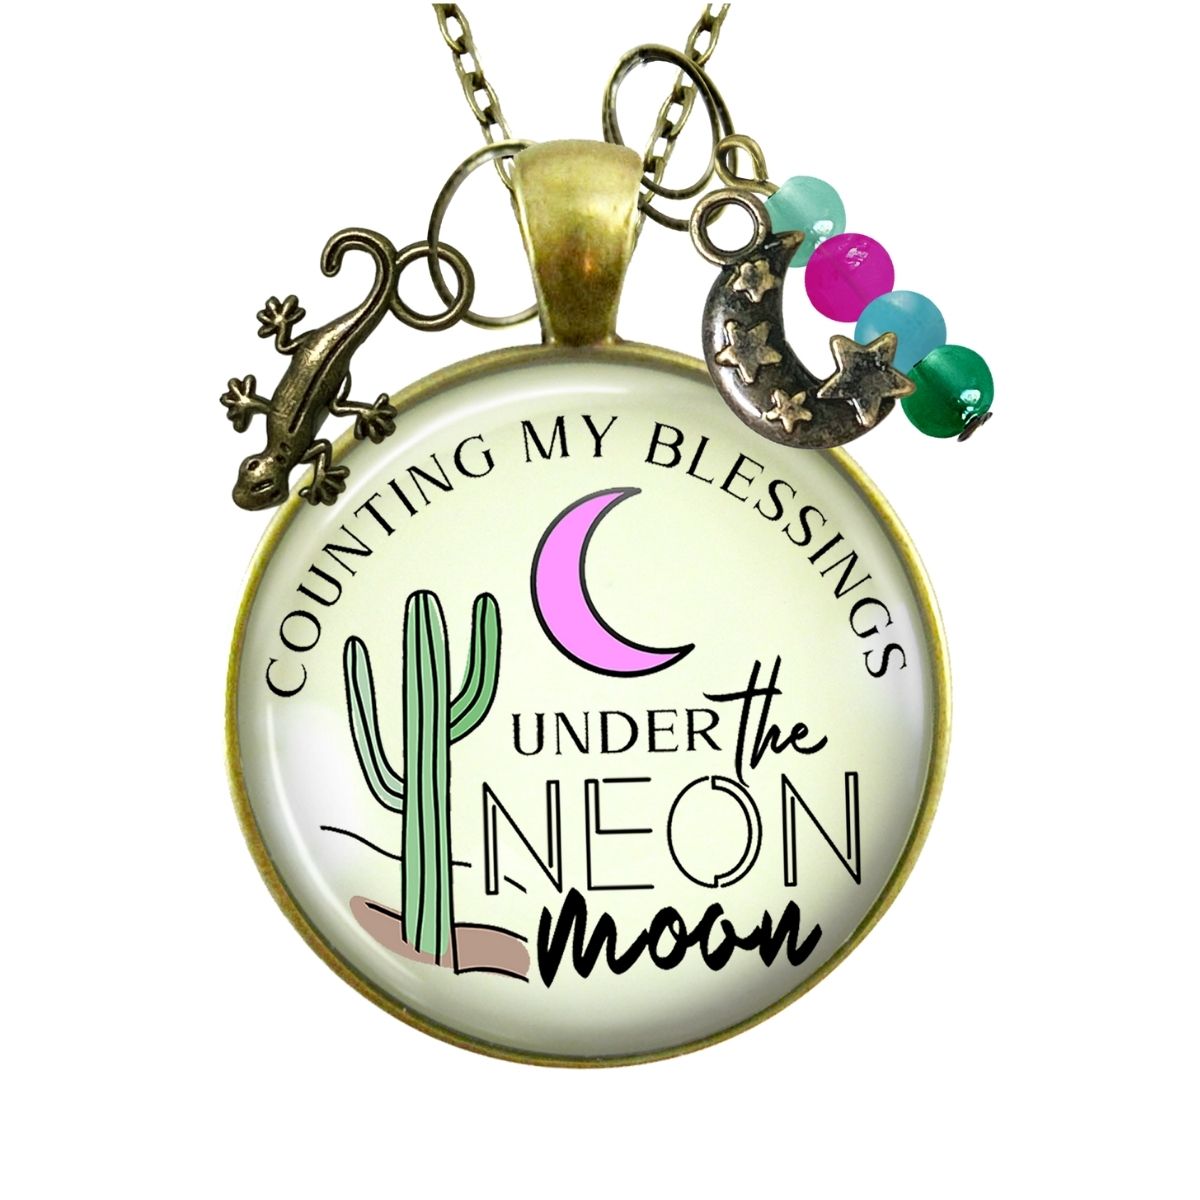 Handmade Gutsy Goodness Jewelry Counting My Blessings Under The Neon Moon Necklace Southwest Boho Style Charm Jewelry & Card